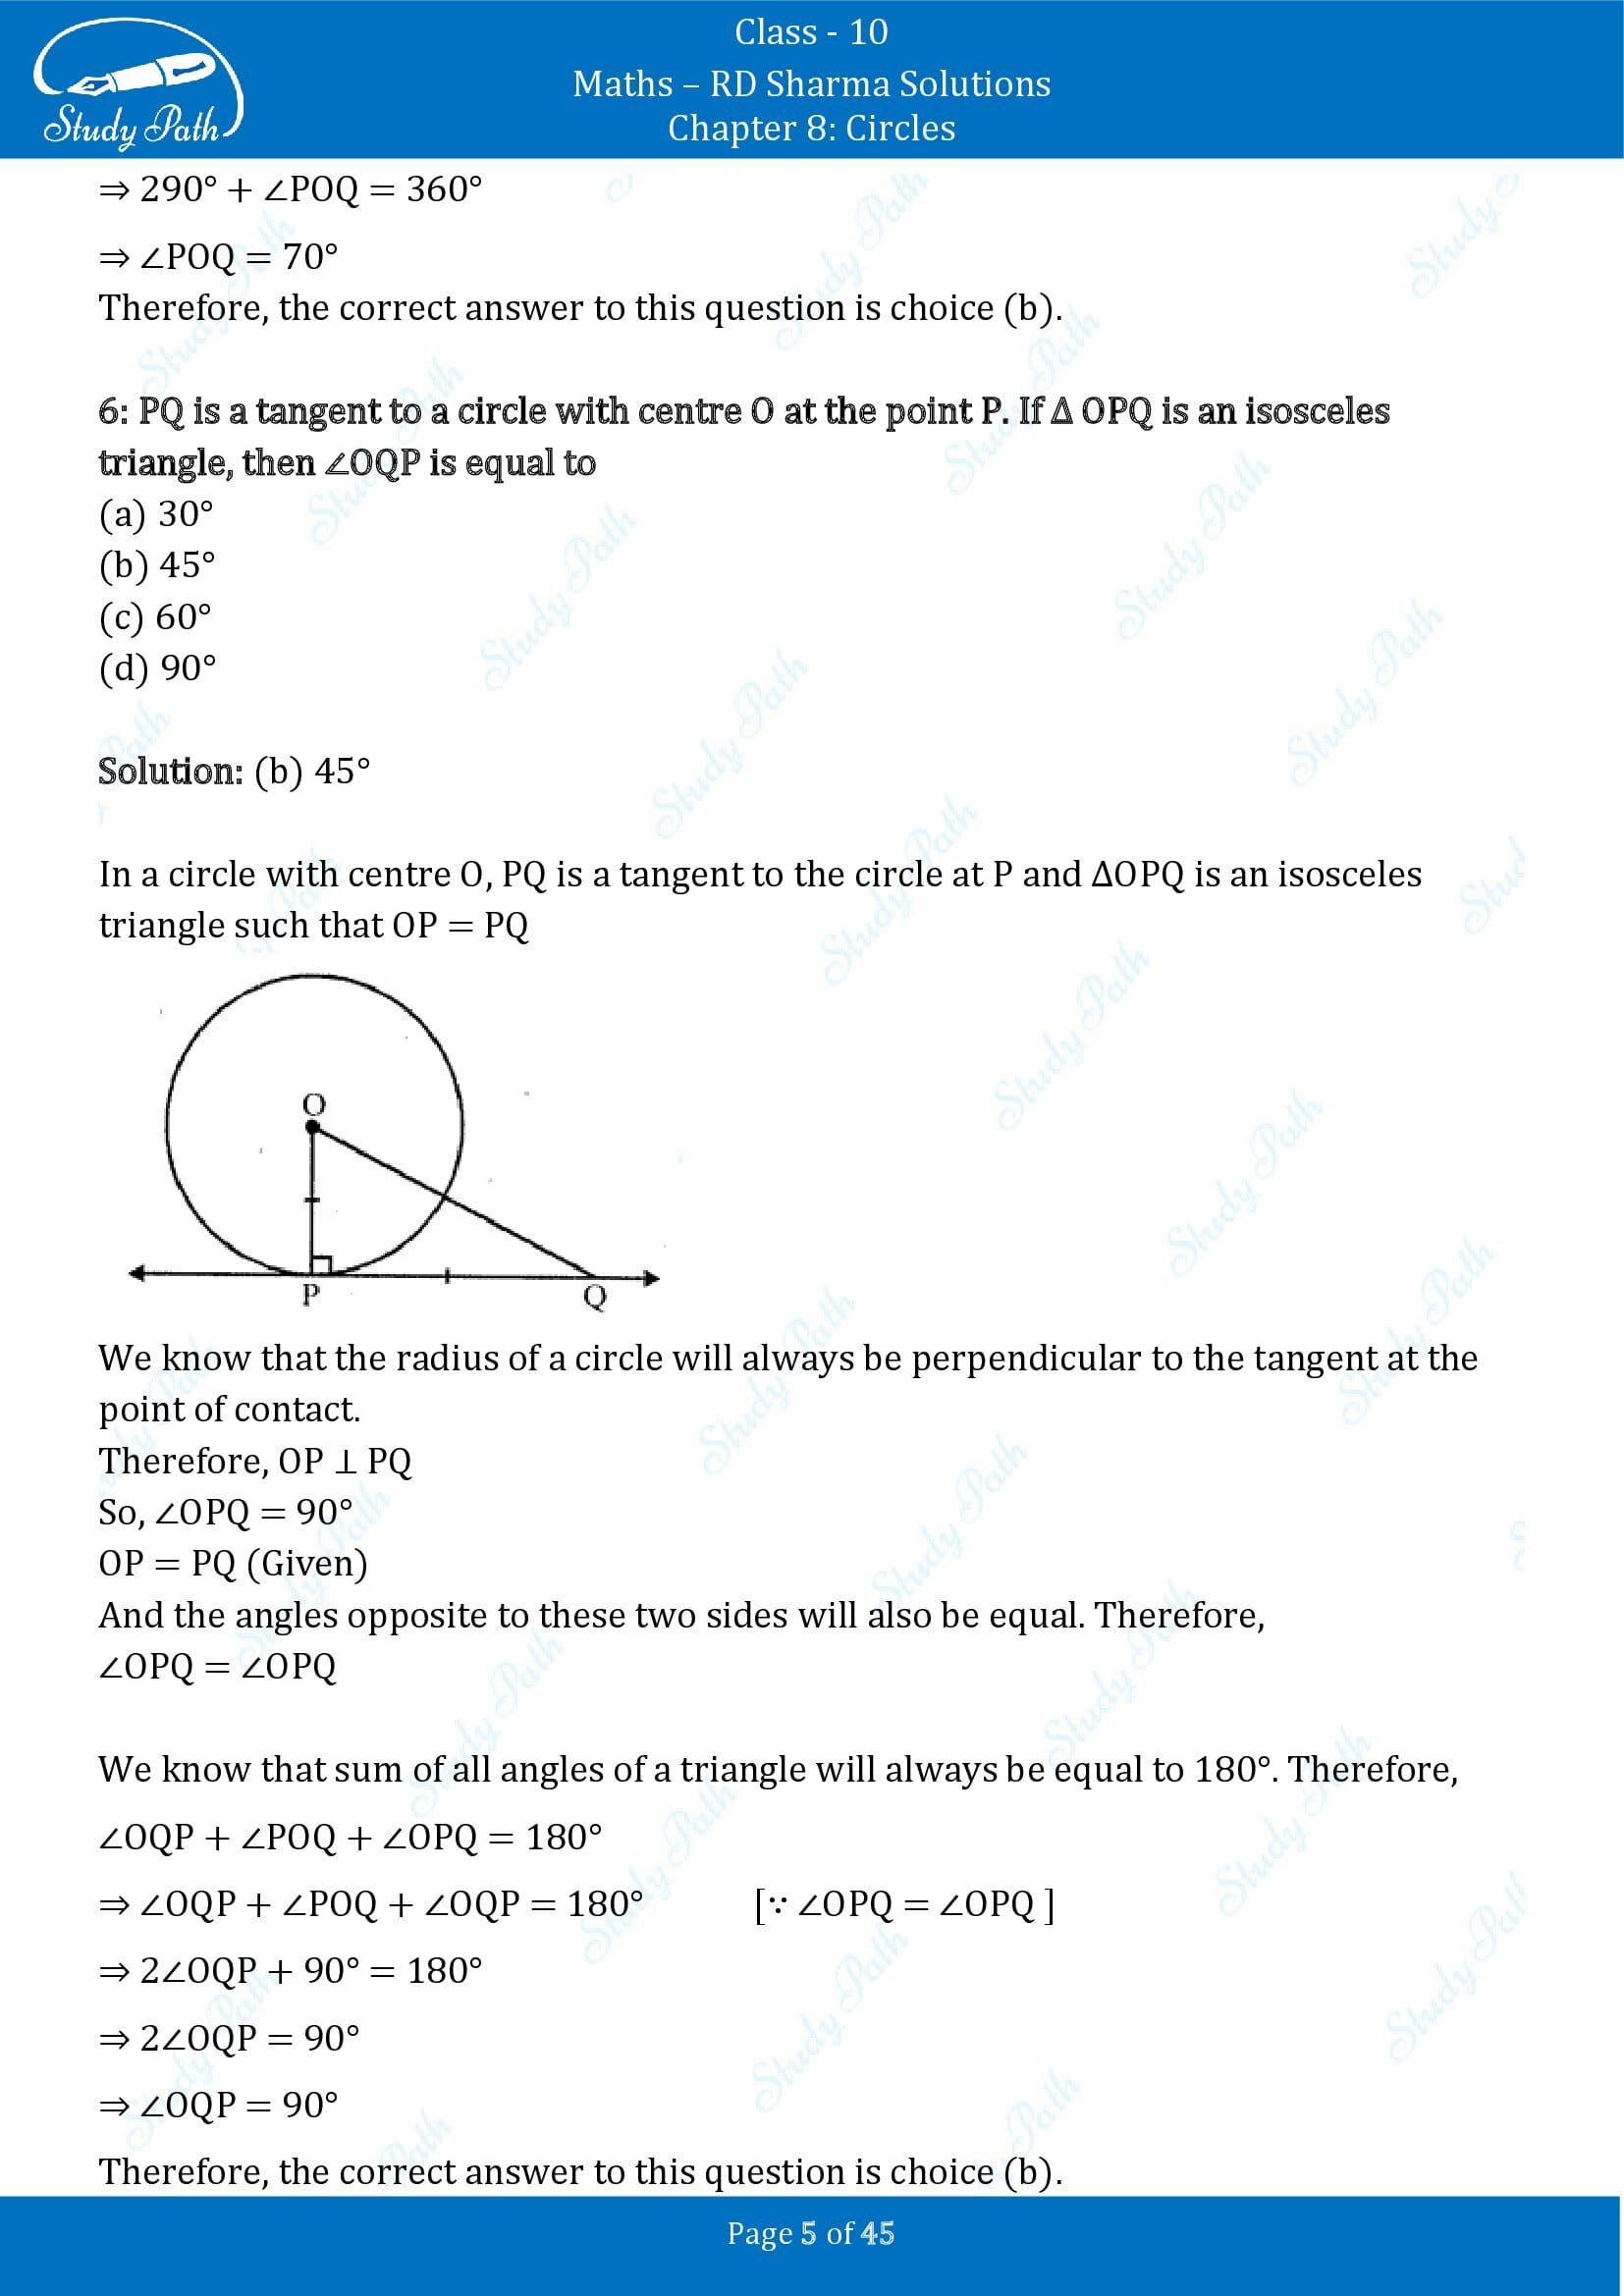 RD Sharma Solutions Class 10 Chapter 8 Circles Multiple Choice Questions MCQs 00005